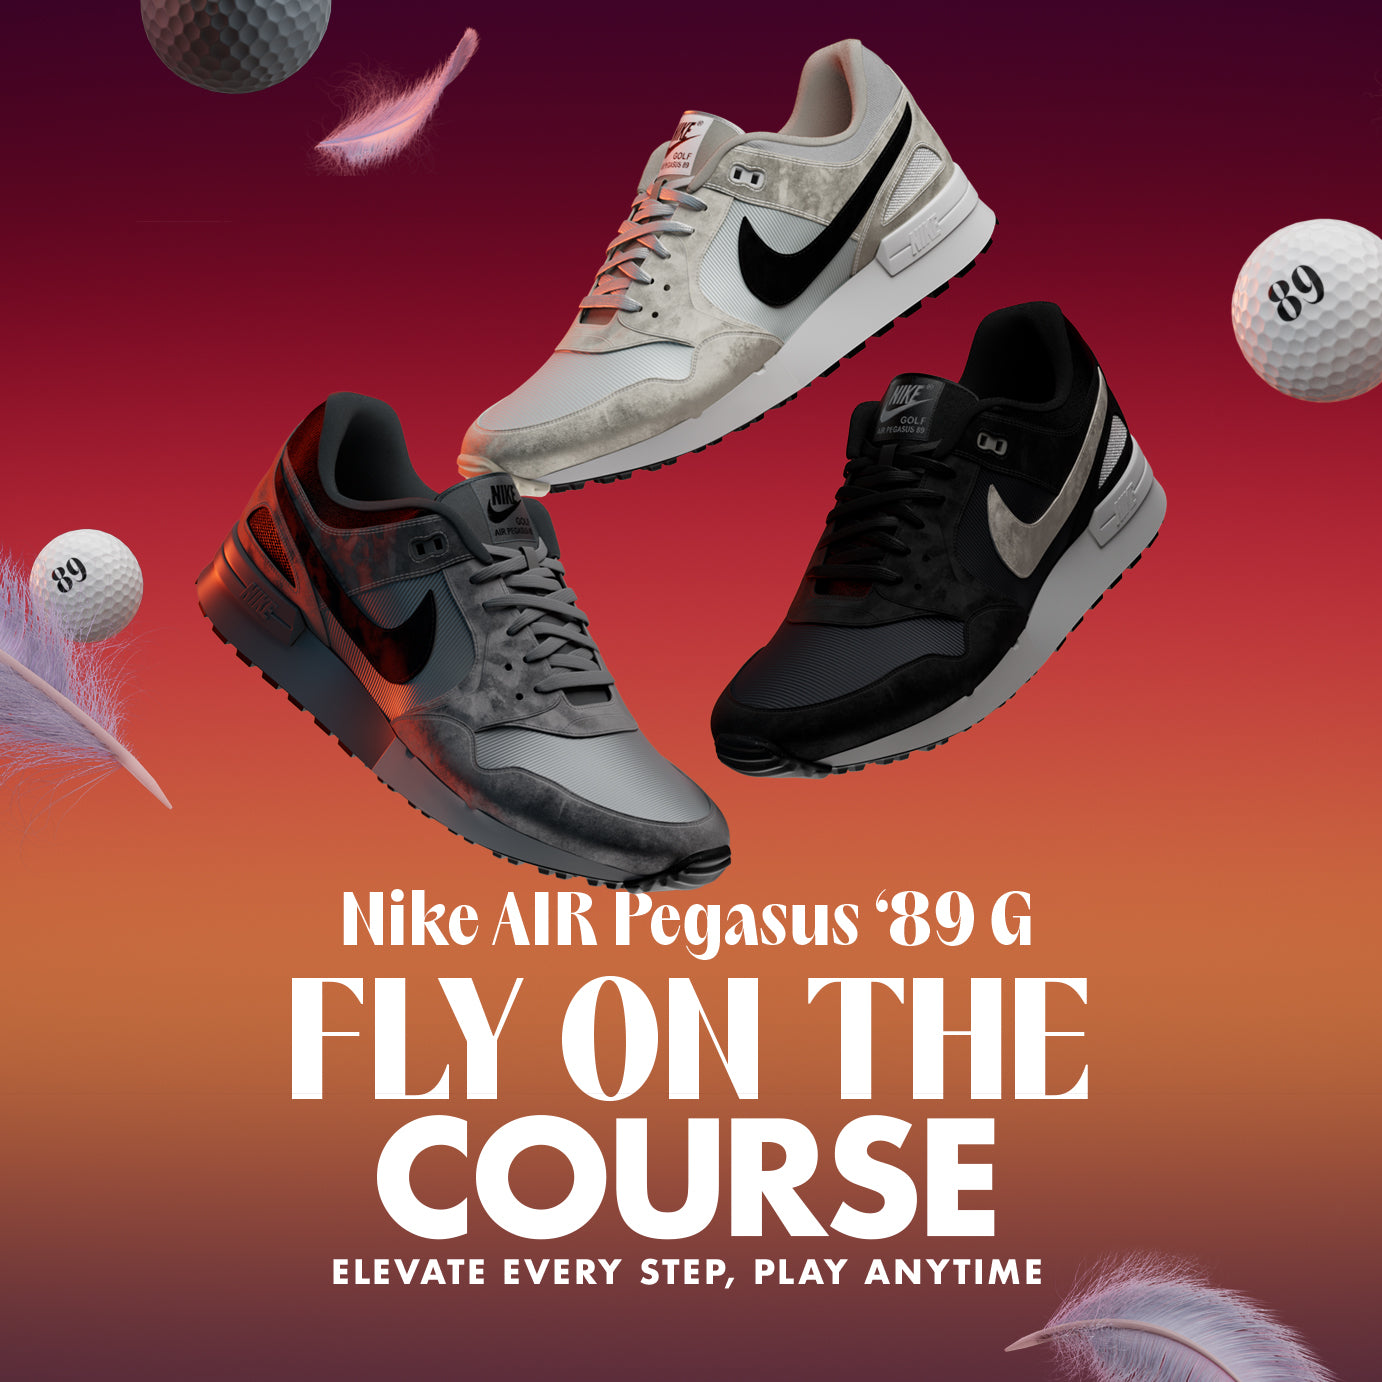 Nike Golf Shoes For Sale - Next Day Delivery